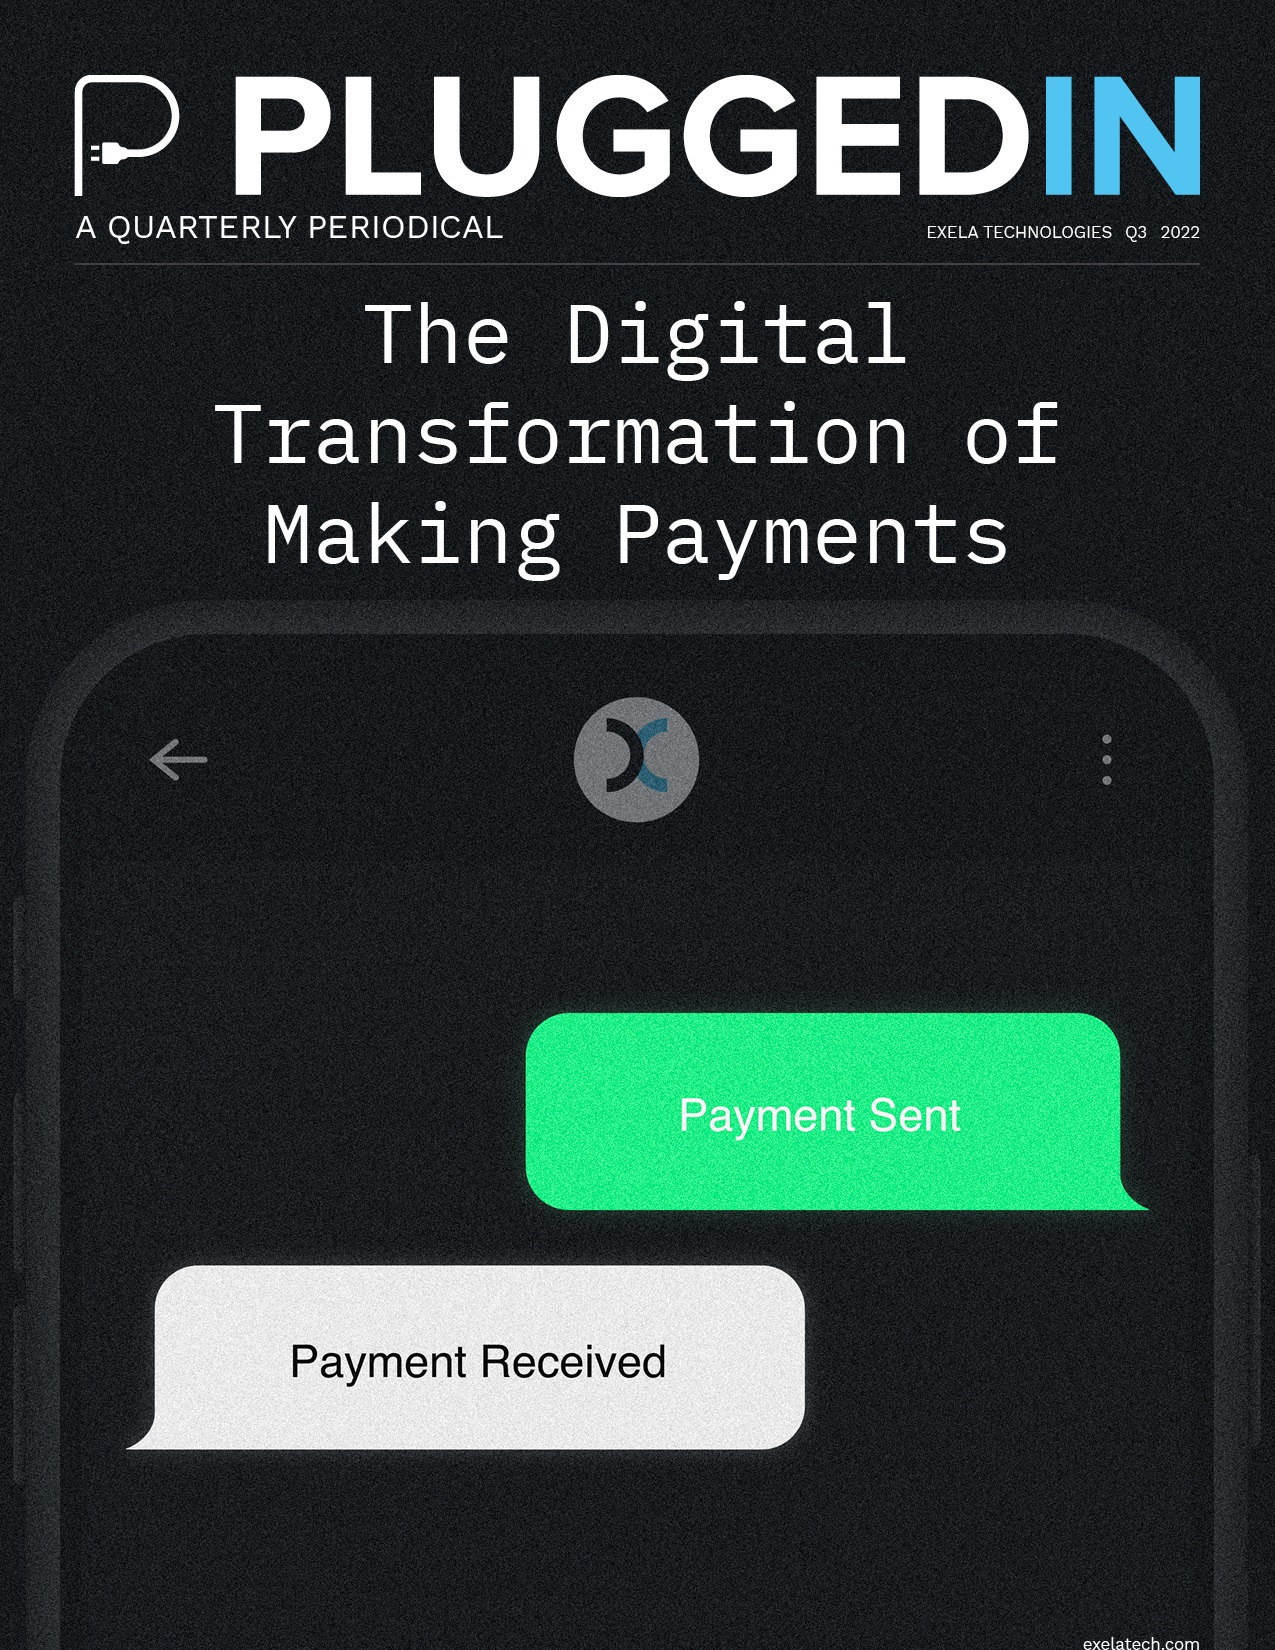 The Digital Transformation of Making Payments